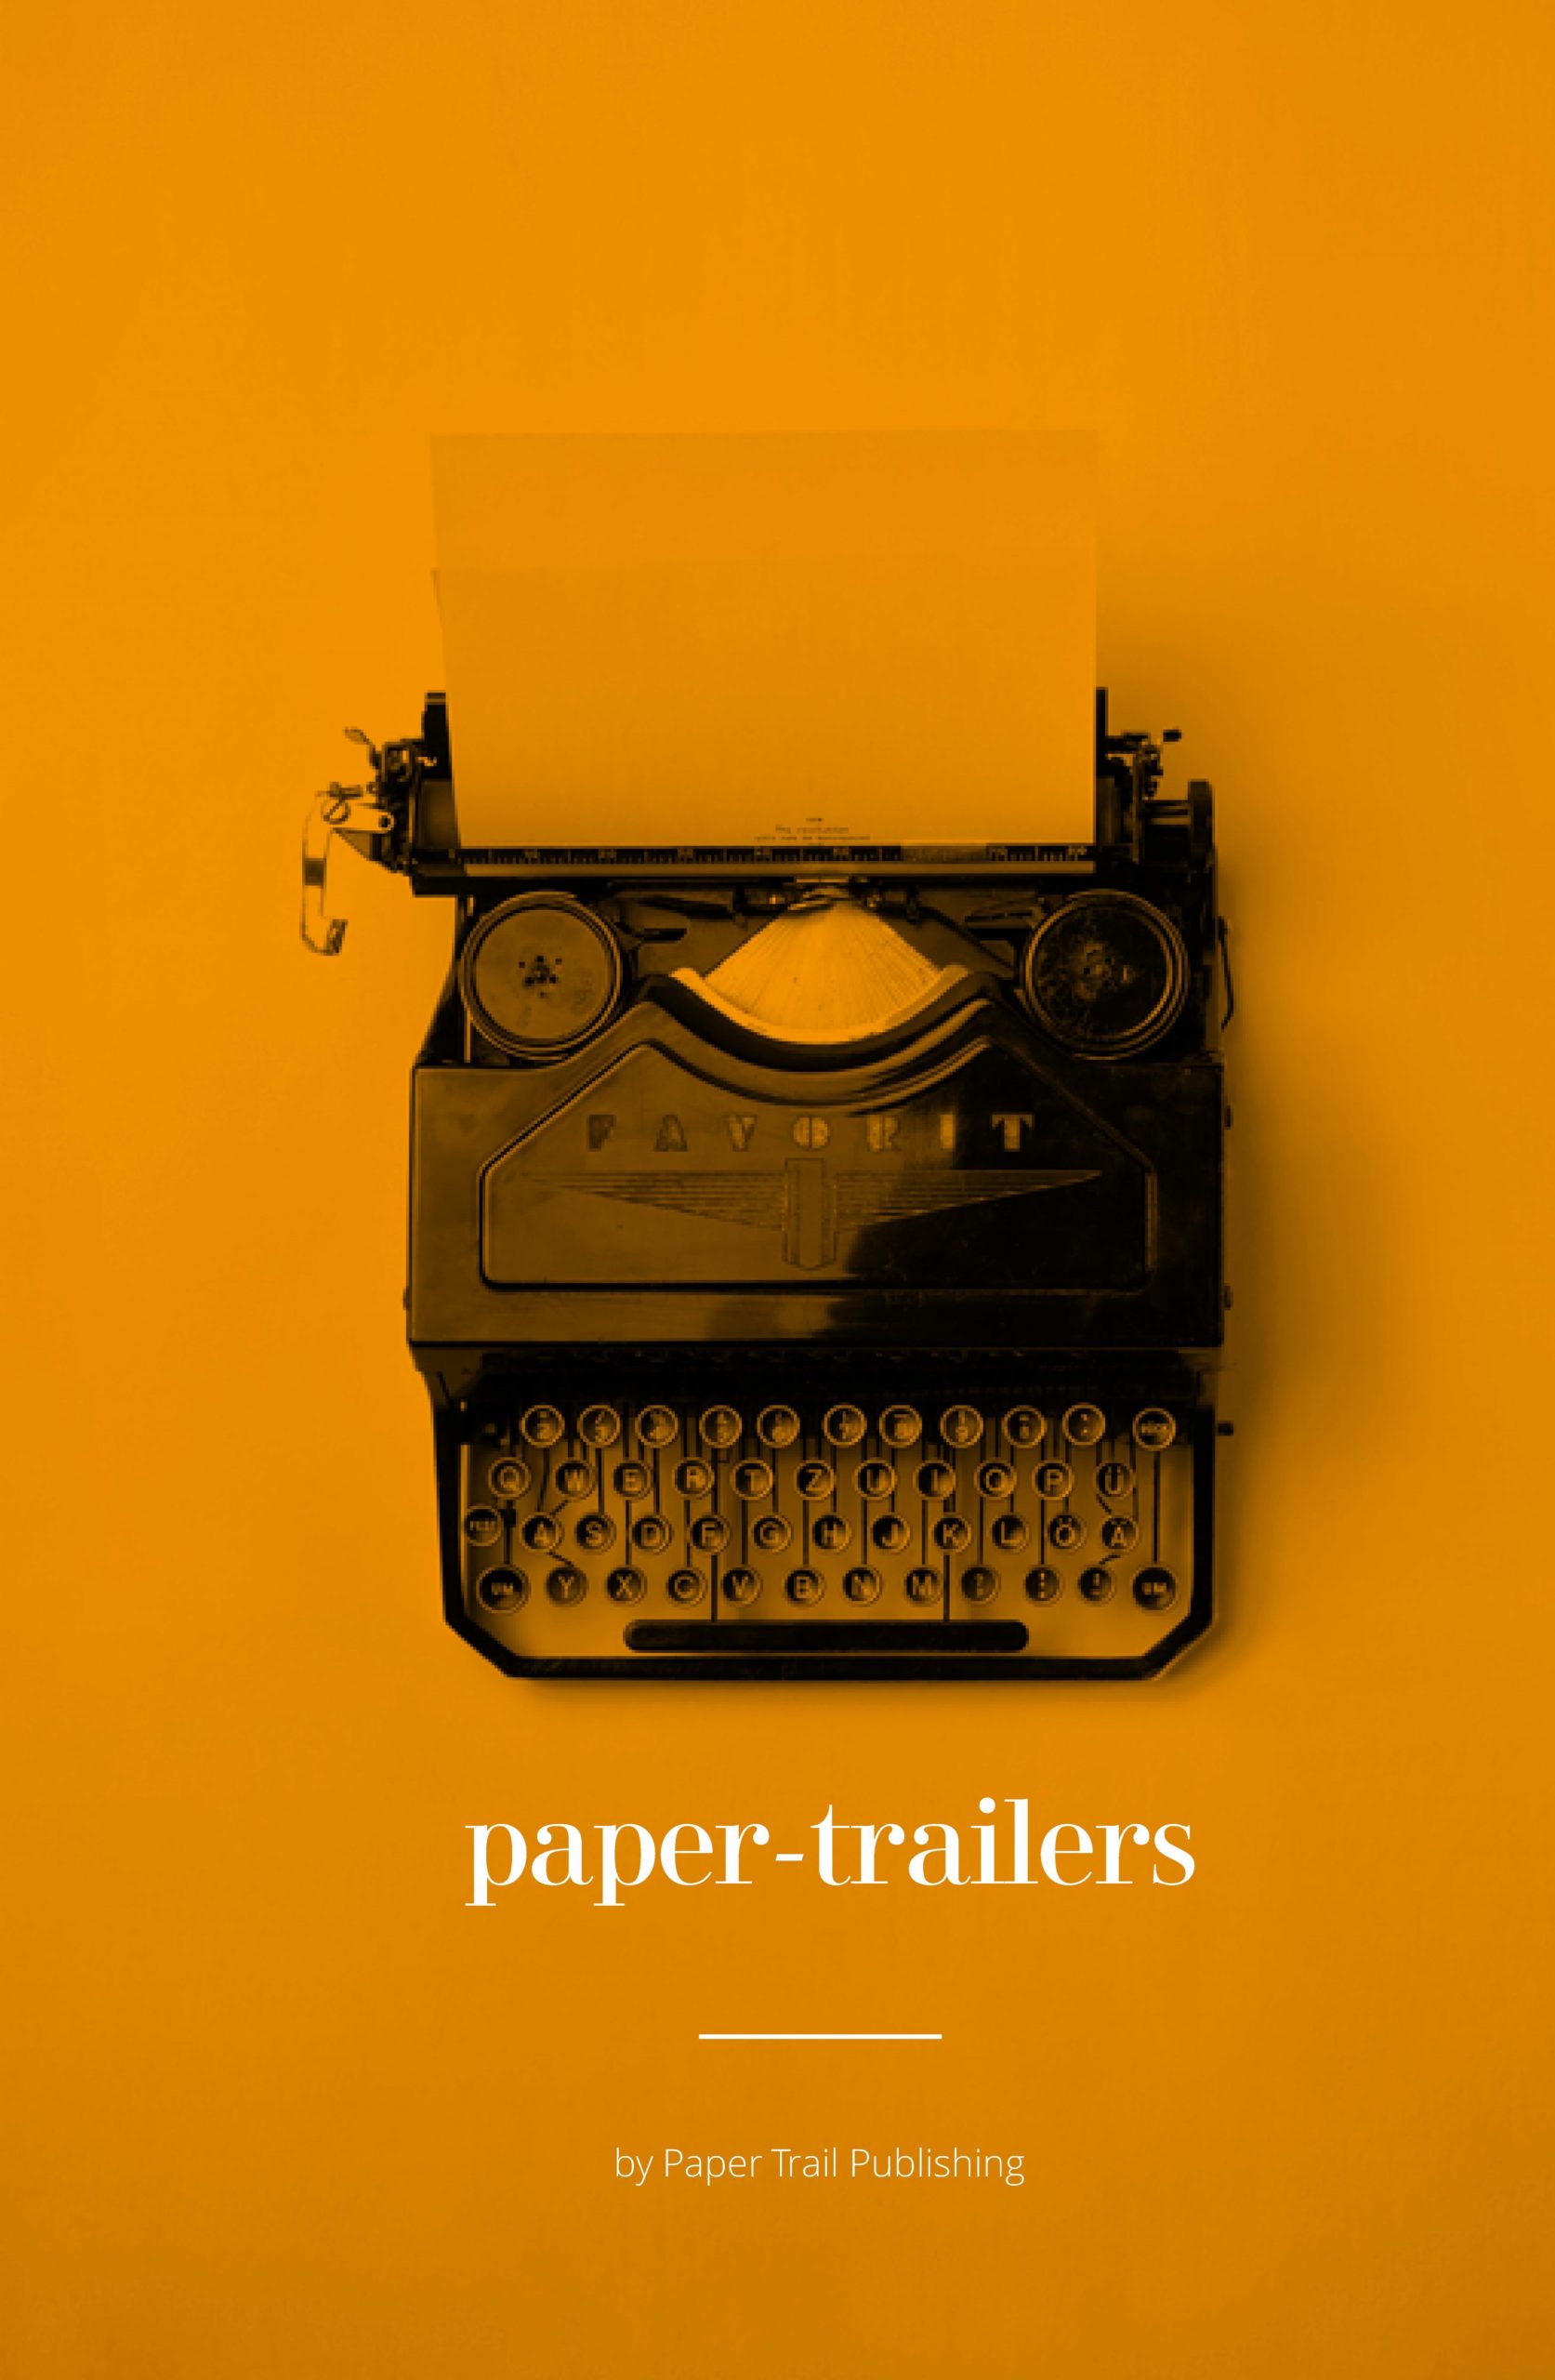 Paper Trailers read about Training with Paper Trail